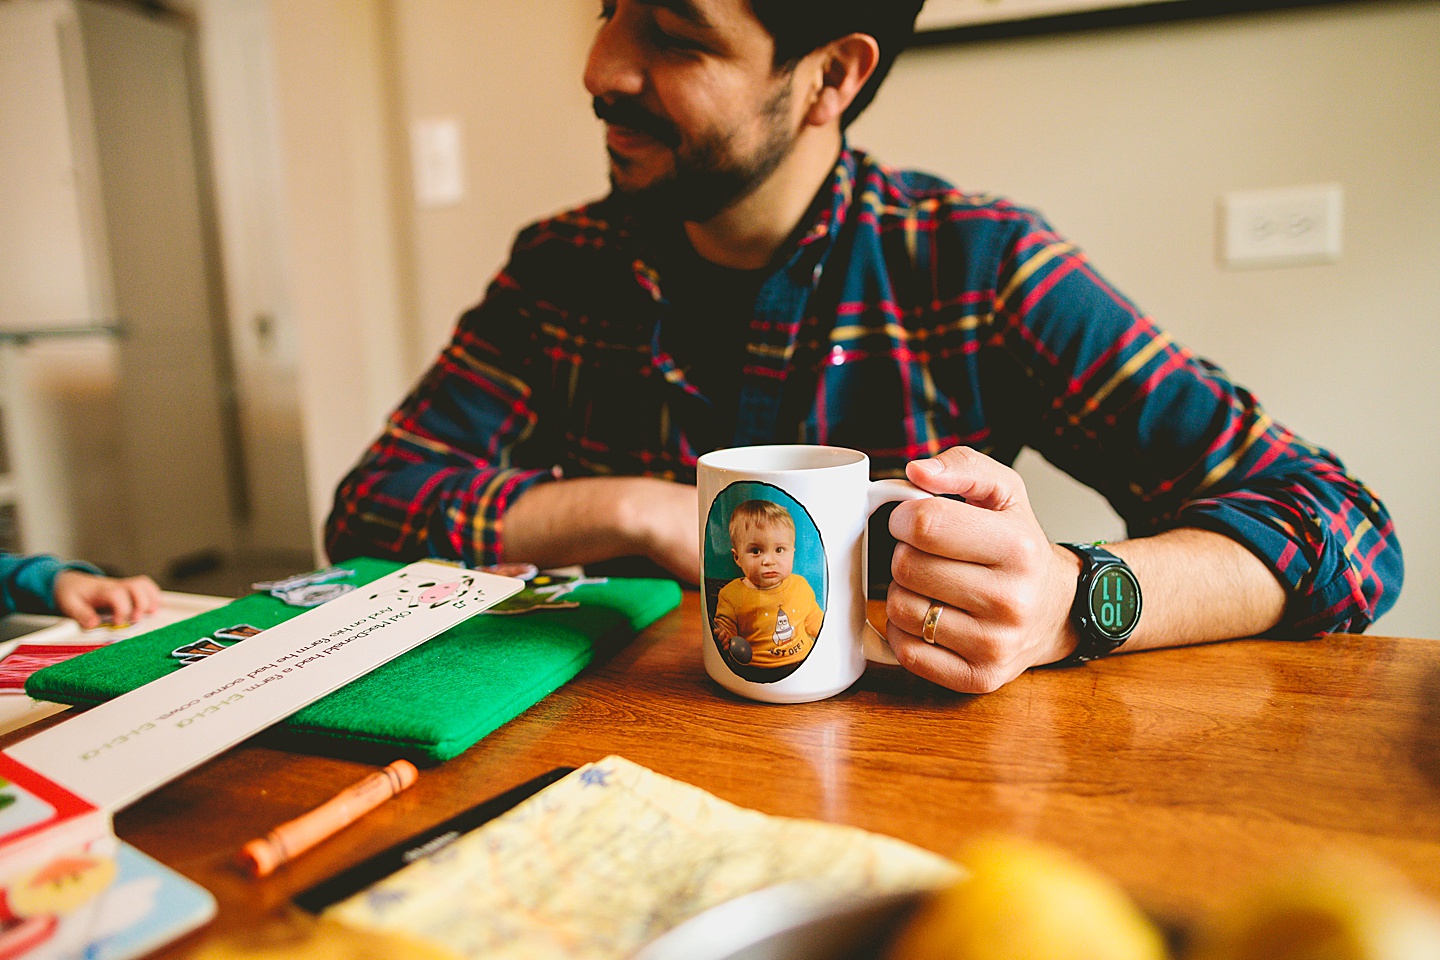 Dad drinking out of mug with kid's face on it